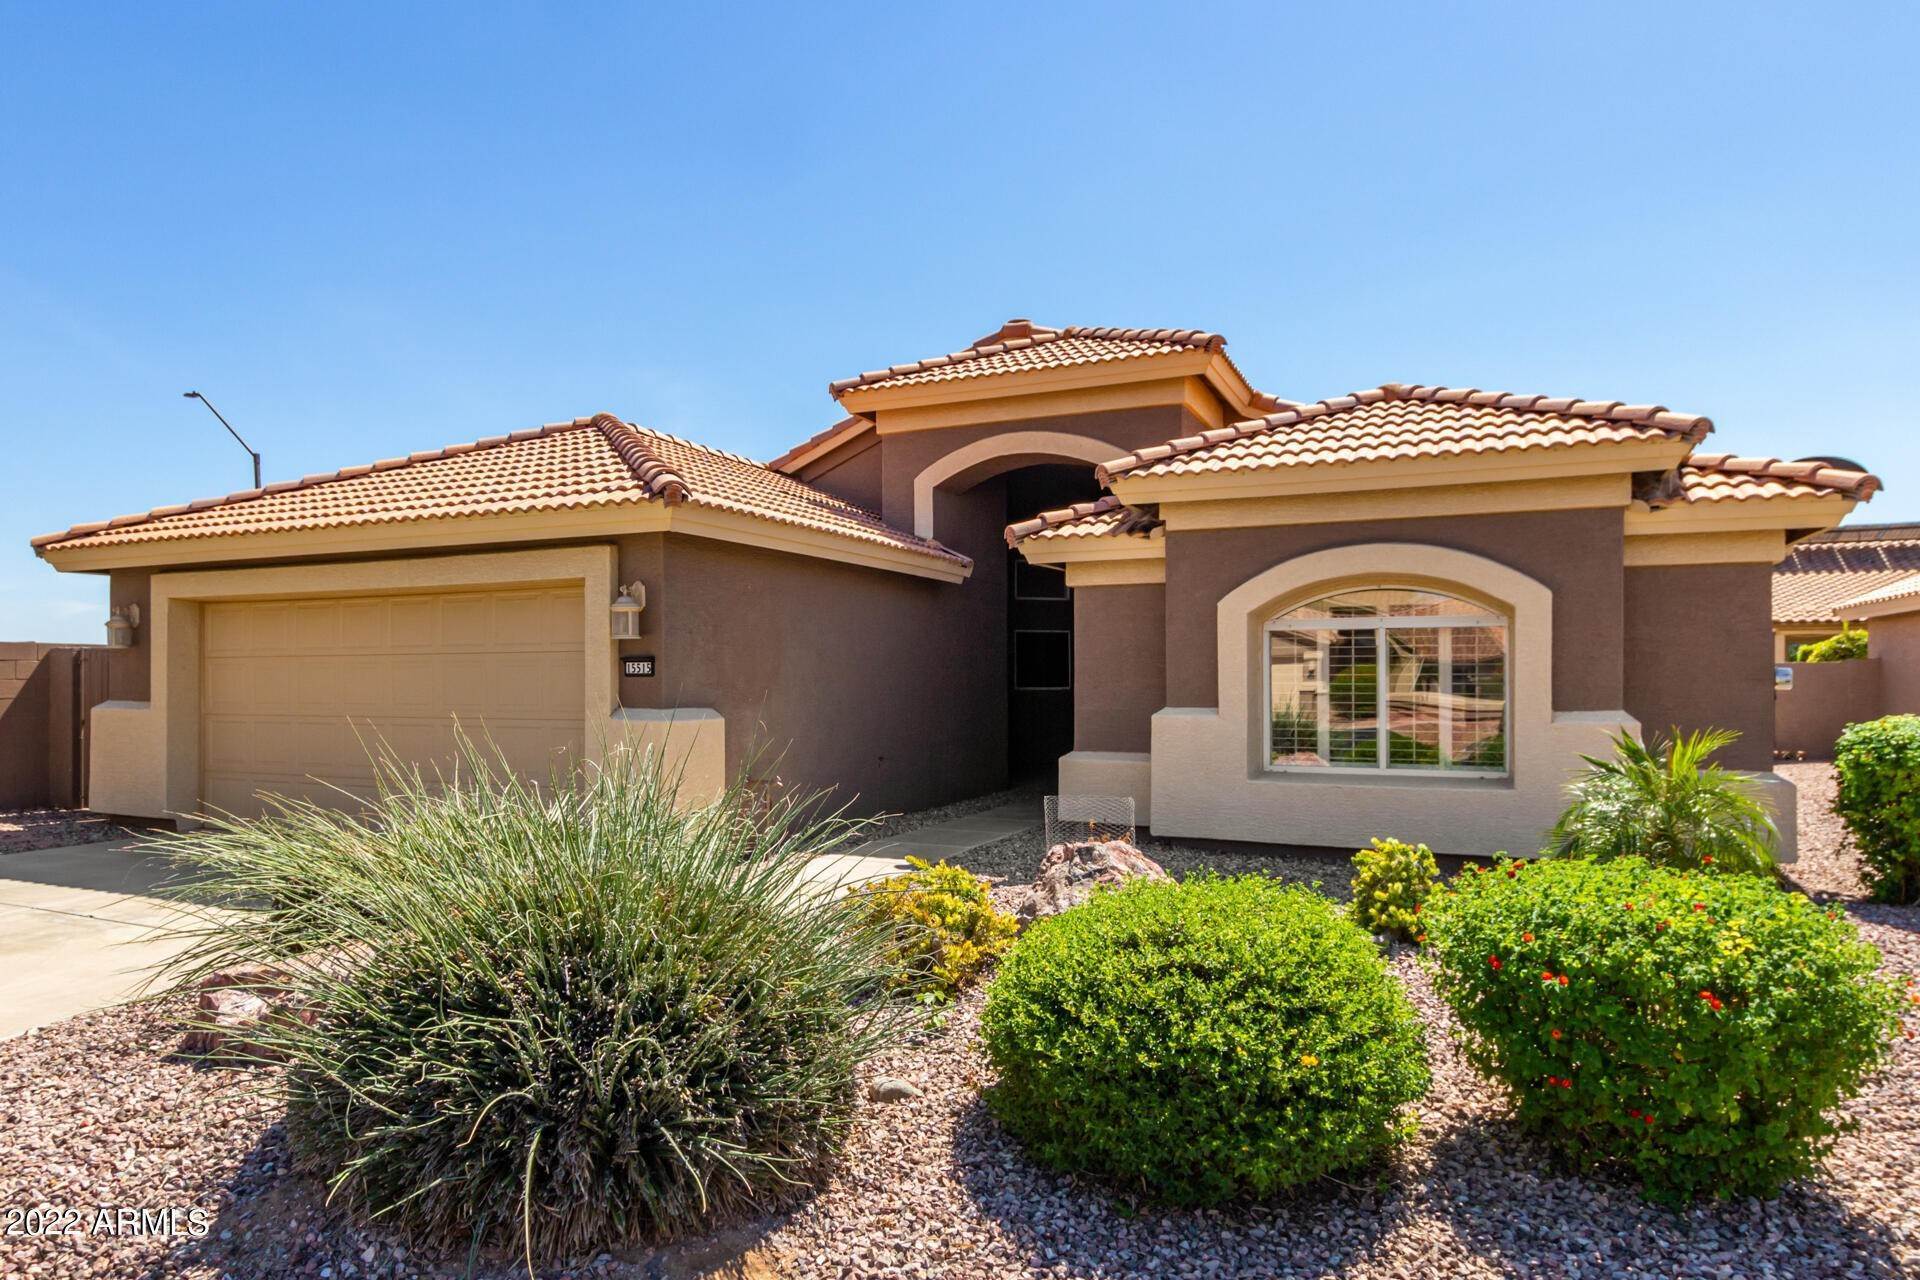 4. Single Family for Sale at Goodyear, AZ 85395